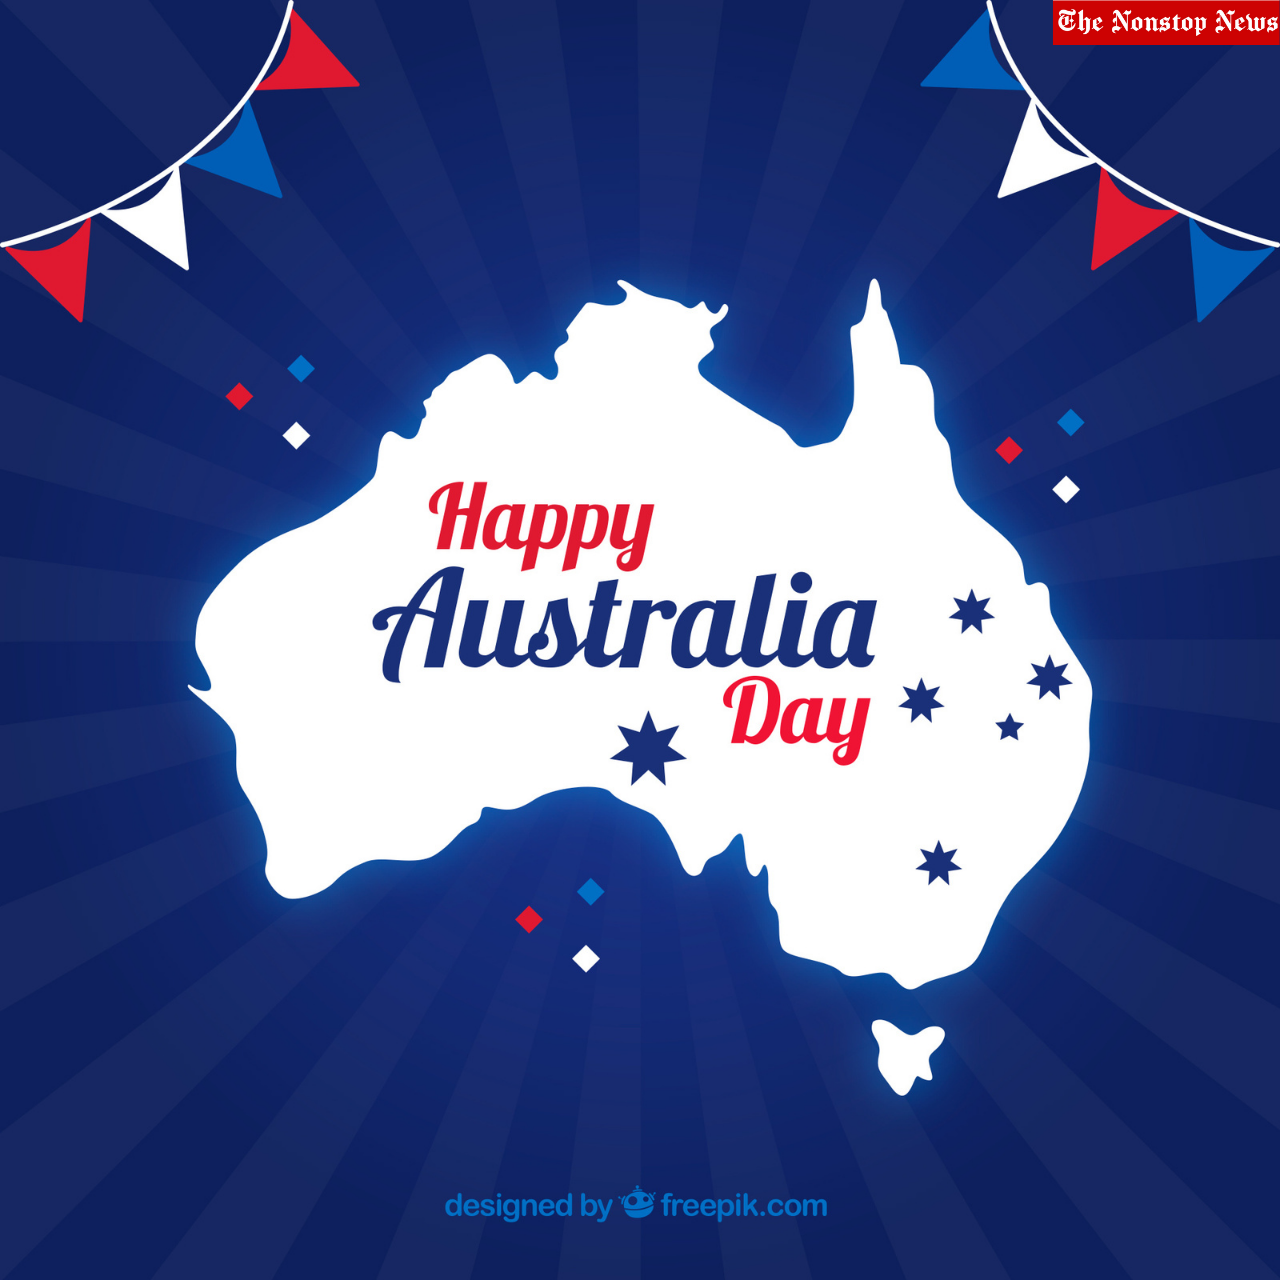 Australia Day 2022 Wishes, HD Images, Quotes, Messages, Greetings, Messages, Sayings to greet your friends and family